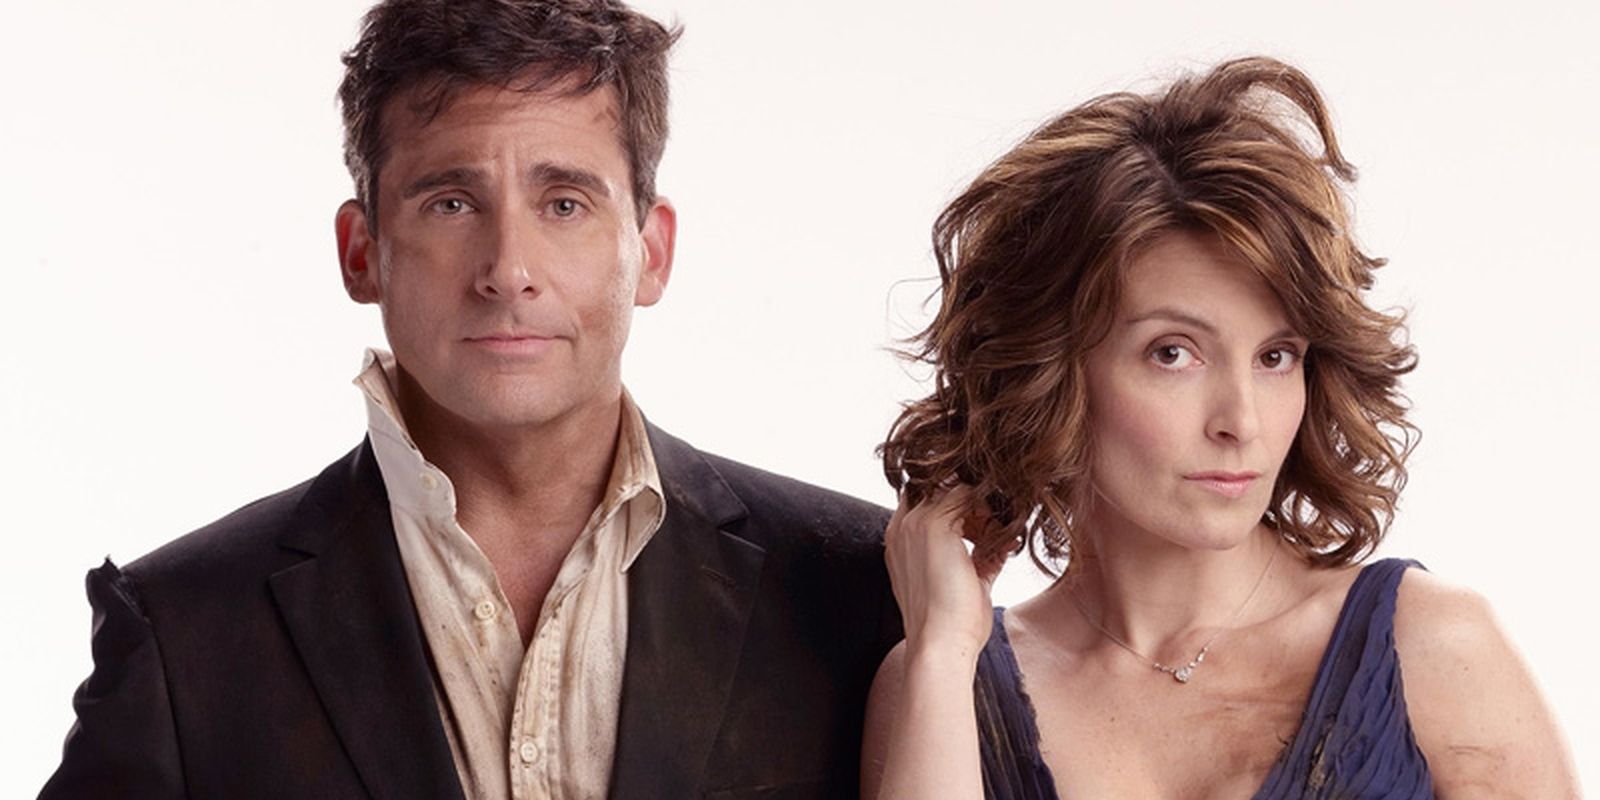 Steven Carell and Tina Fey looking like a mess in Date Night poster